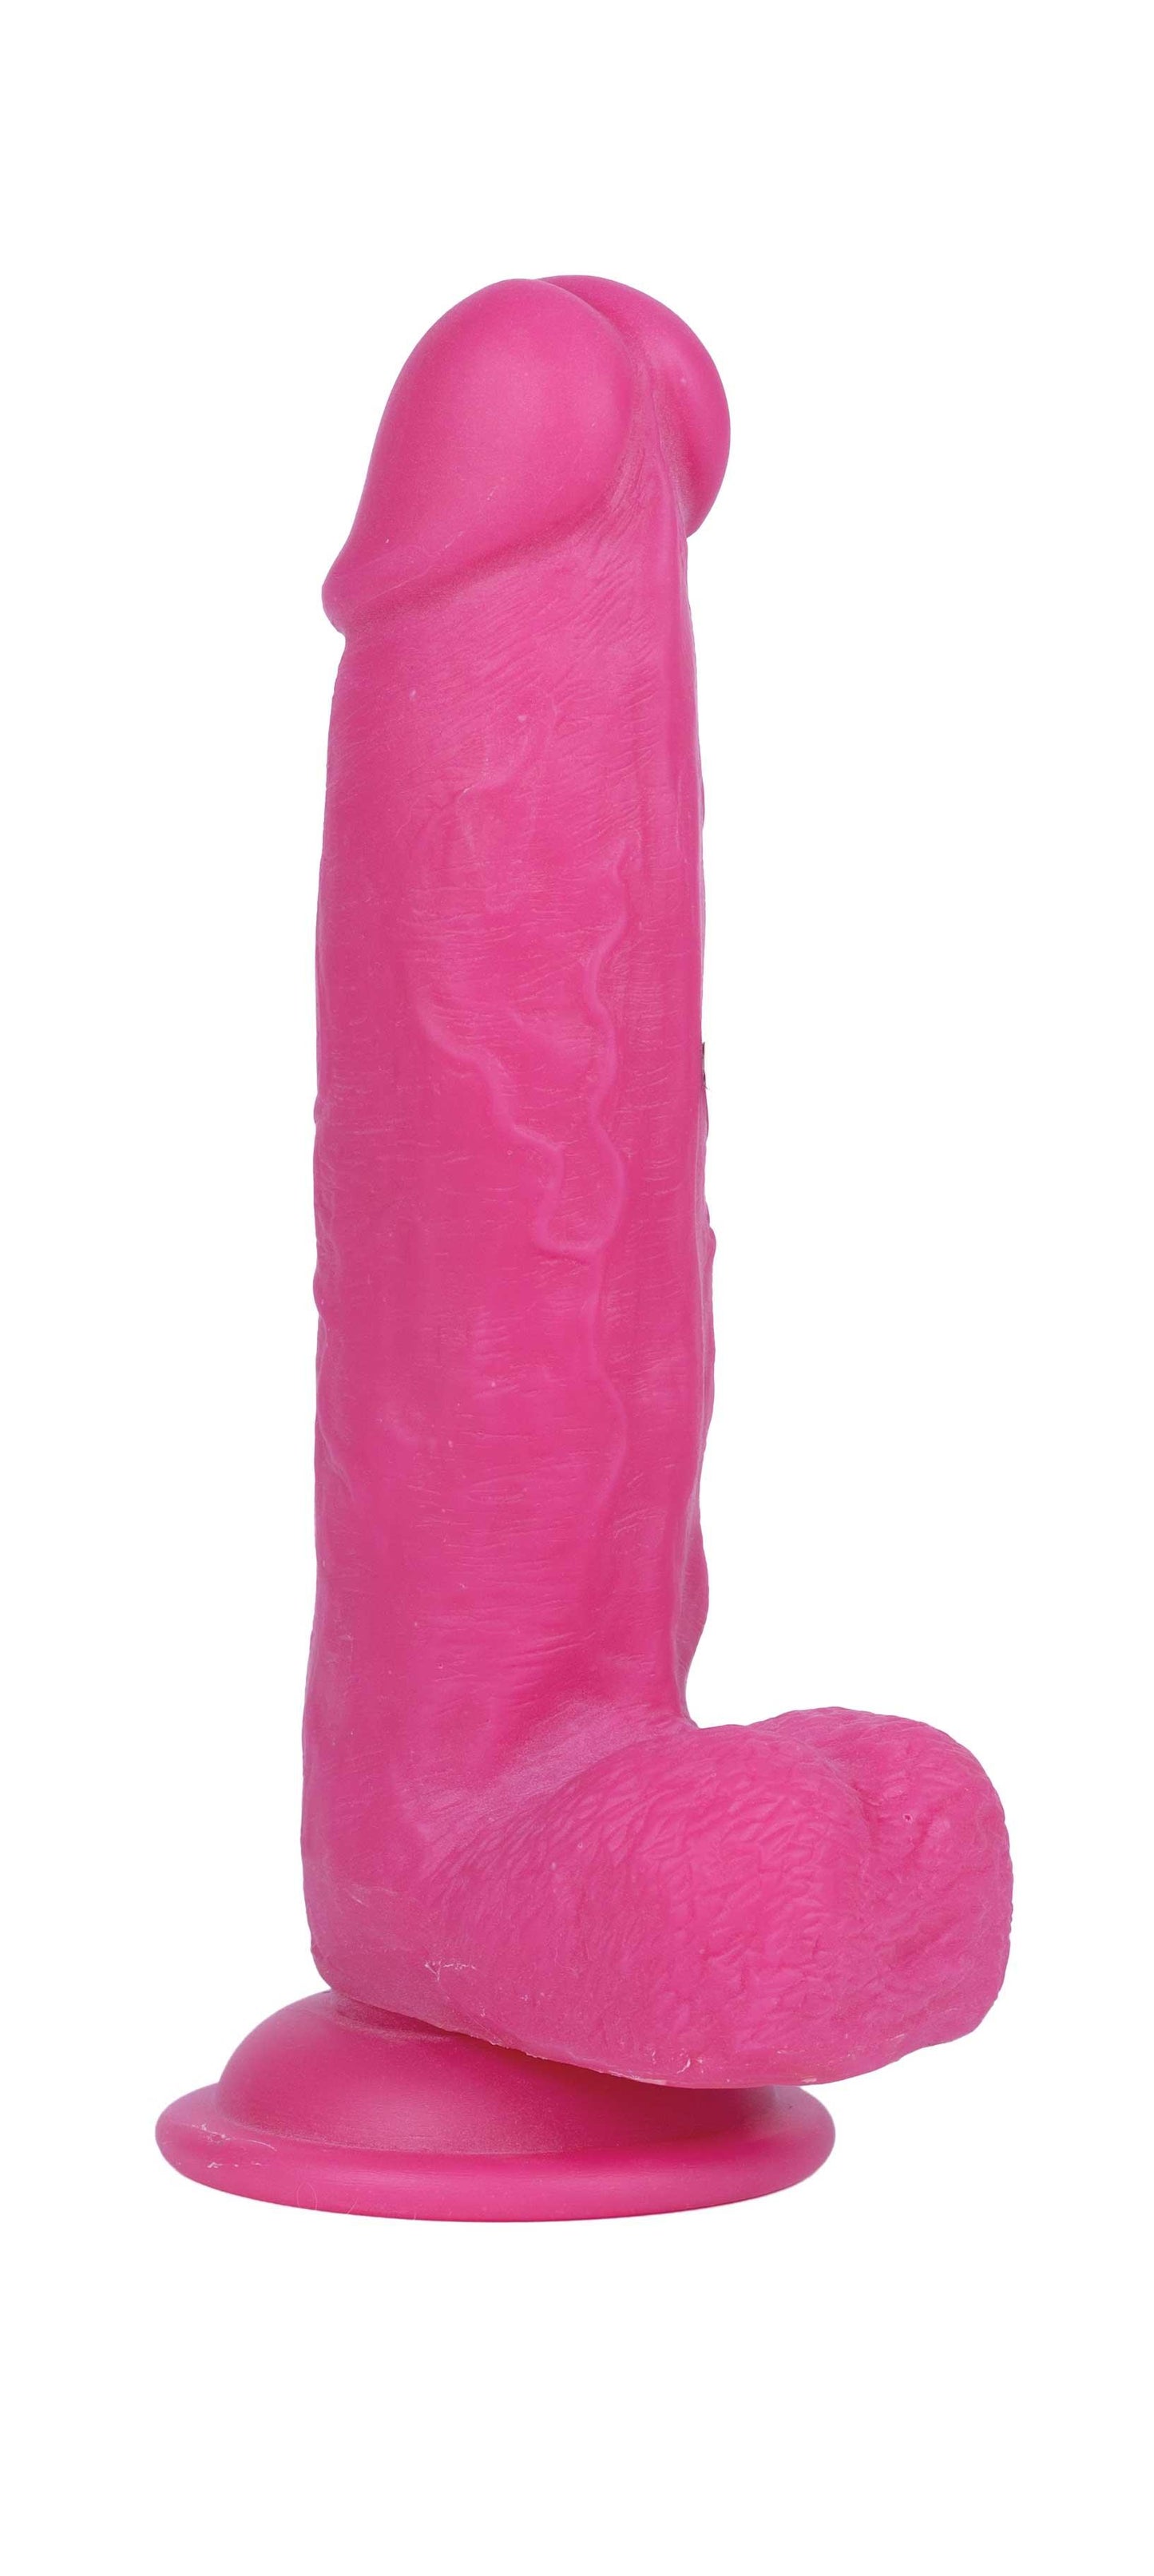 Get Lucky Ms. Pink 7.5 Inch Dildo - Pink - My Sex Toy Hub